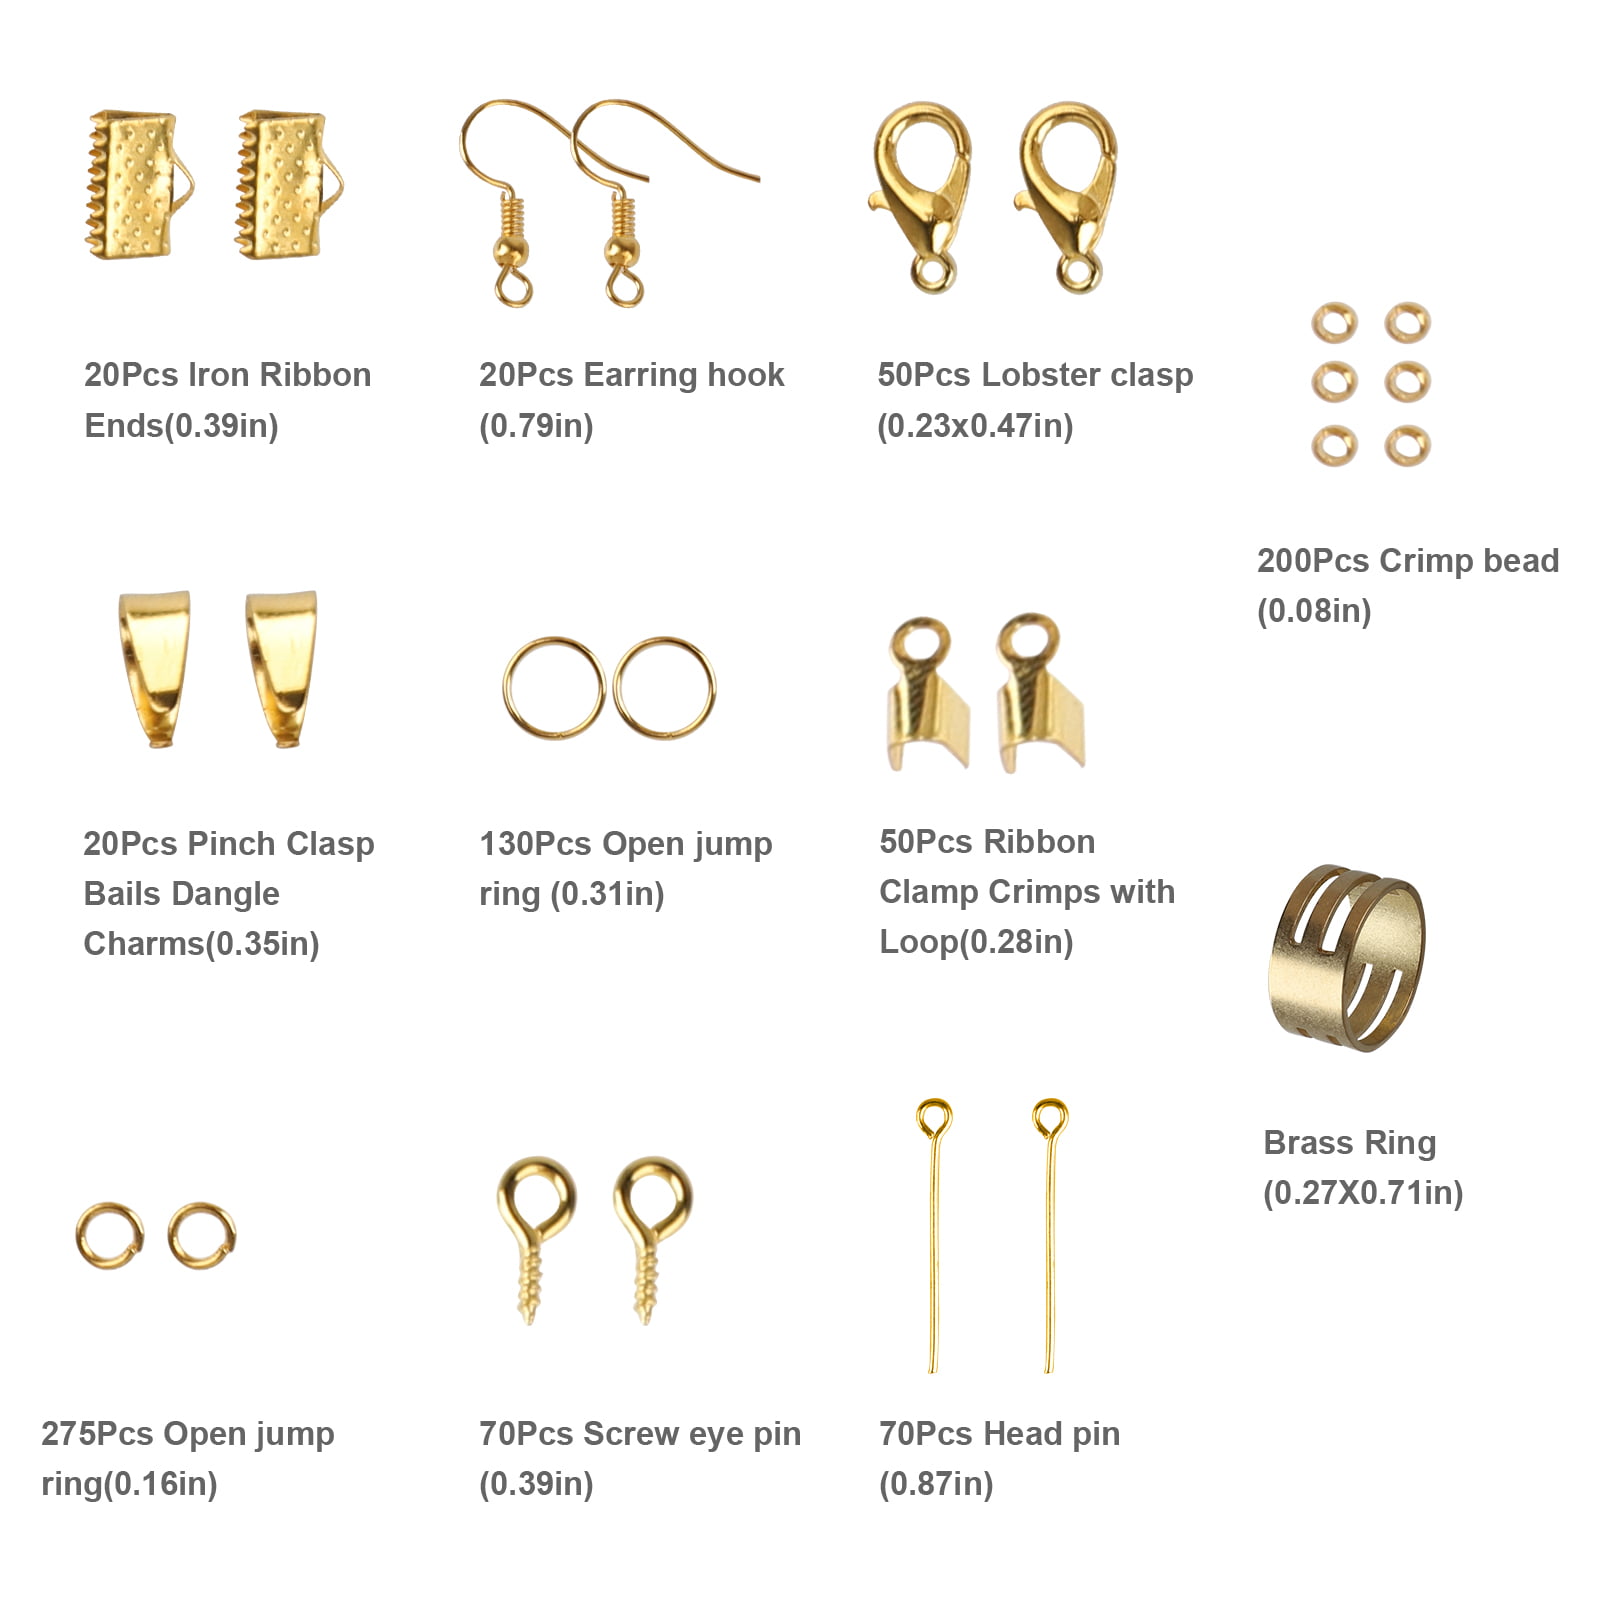 types of earring clasps - Google Search  Jewelry clasps, Jewelry making  tools, Types of earrings